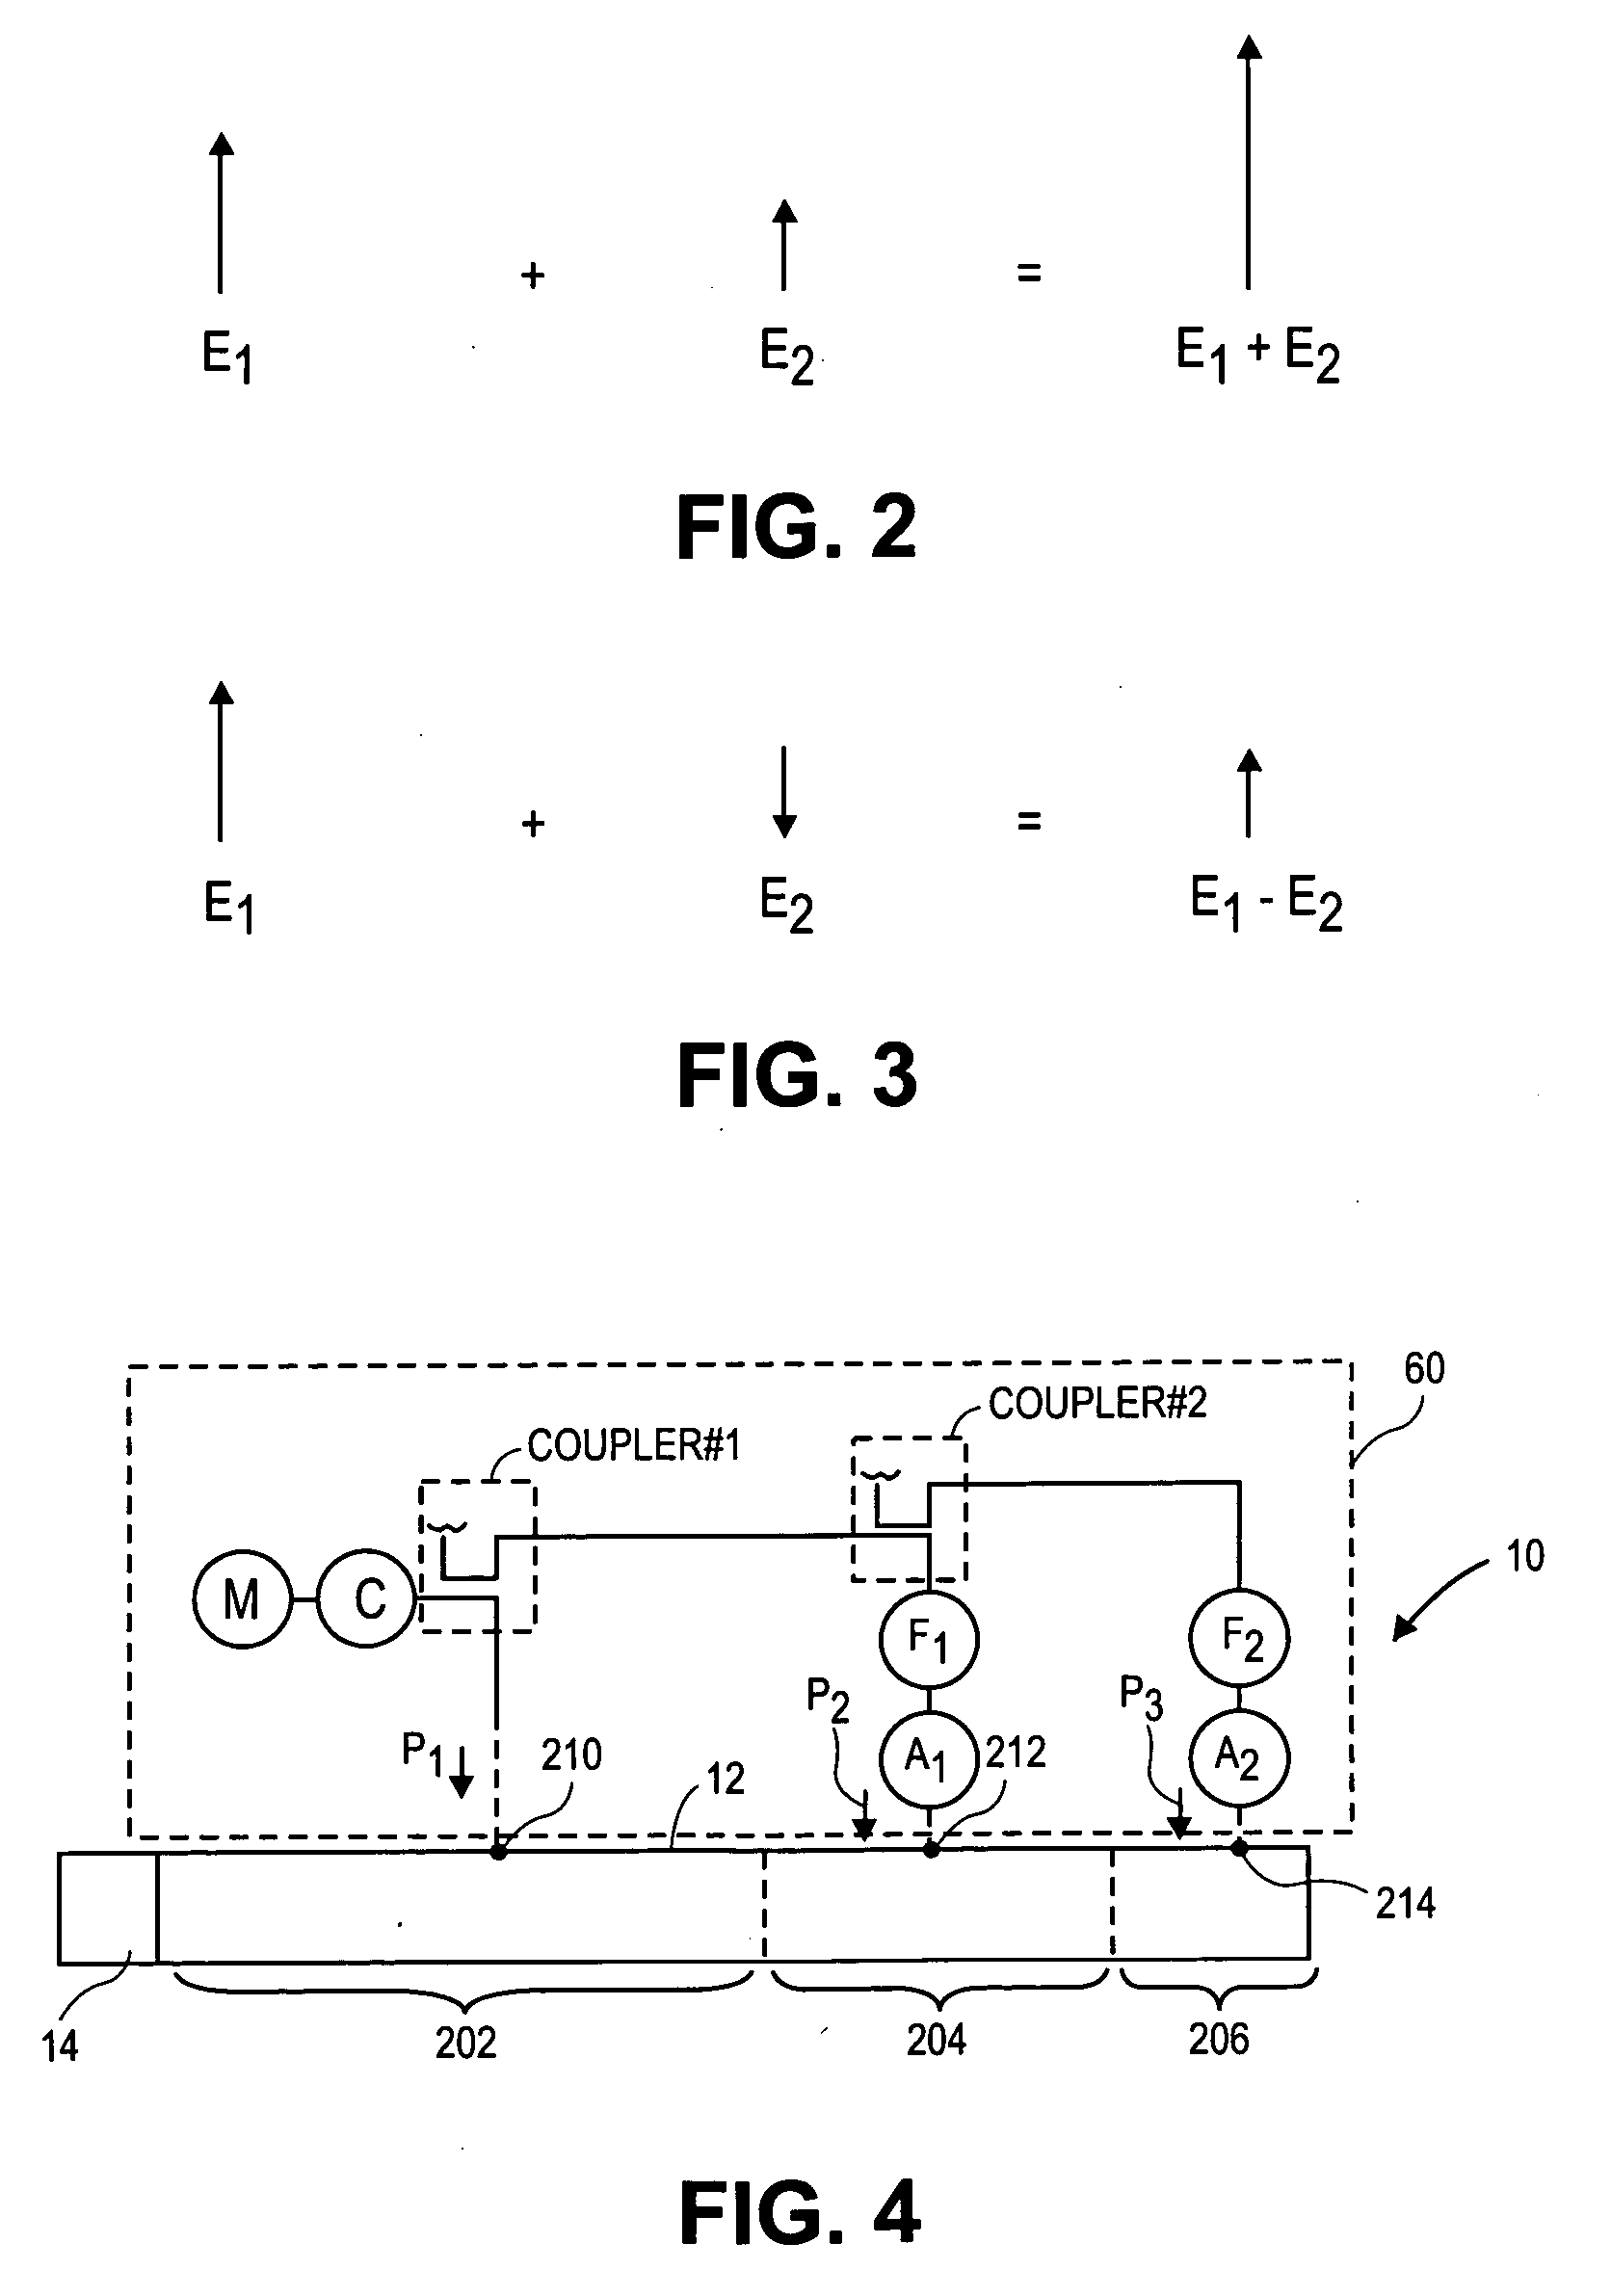 Standing wave particle beam accelerator having a plurality of power inputs